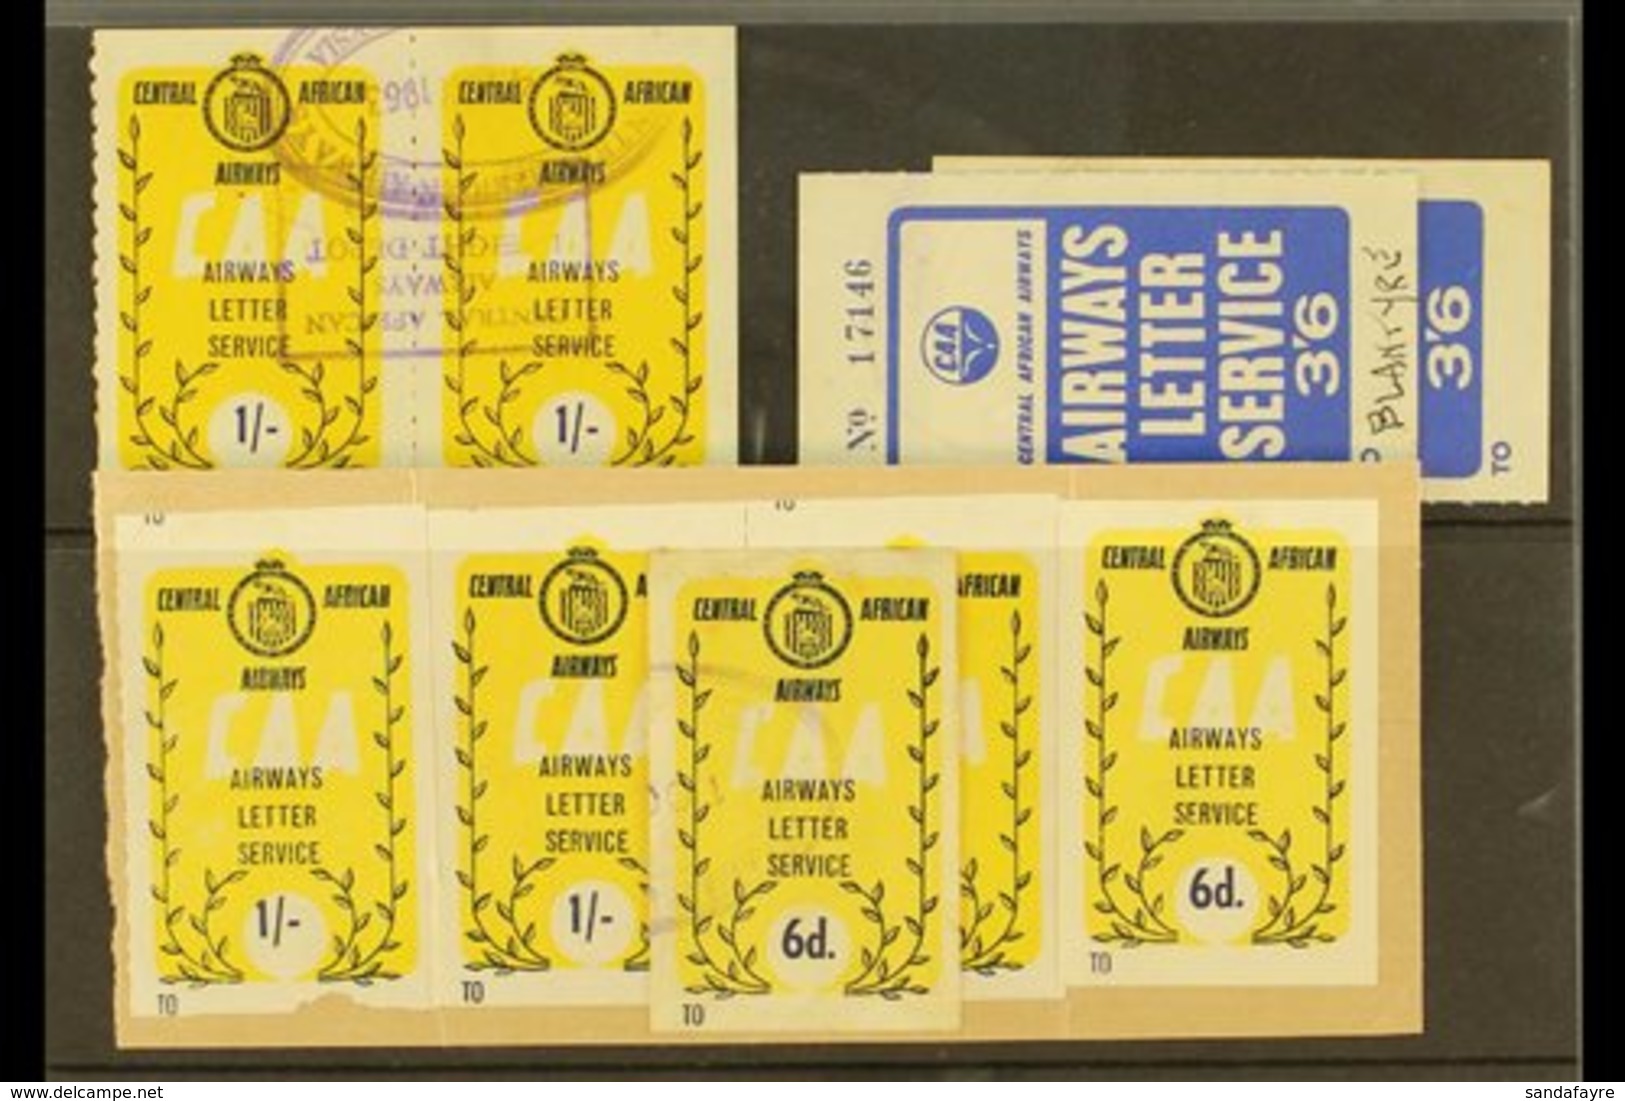 CENTRAL AFRICAN AIRWAYS Airways Letter Service Labels Group Incl. Blue On Yellow 6d & 1s Values, Plus 3s6d Blue Labels,  - Rodesia & Nyasaland (1954-1963)